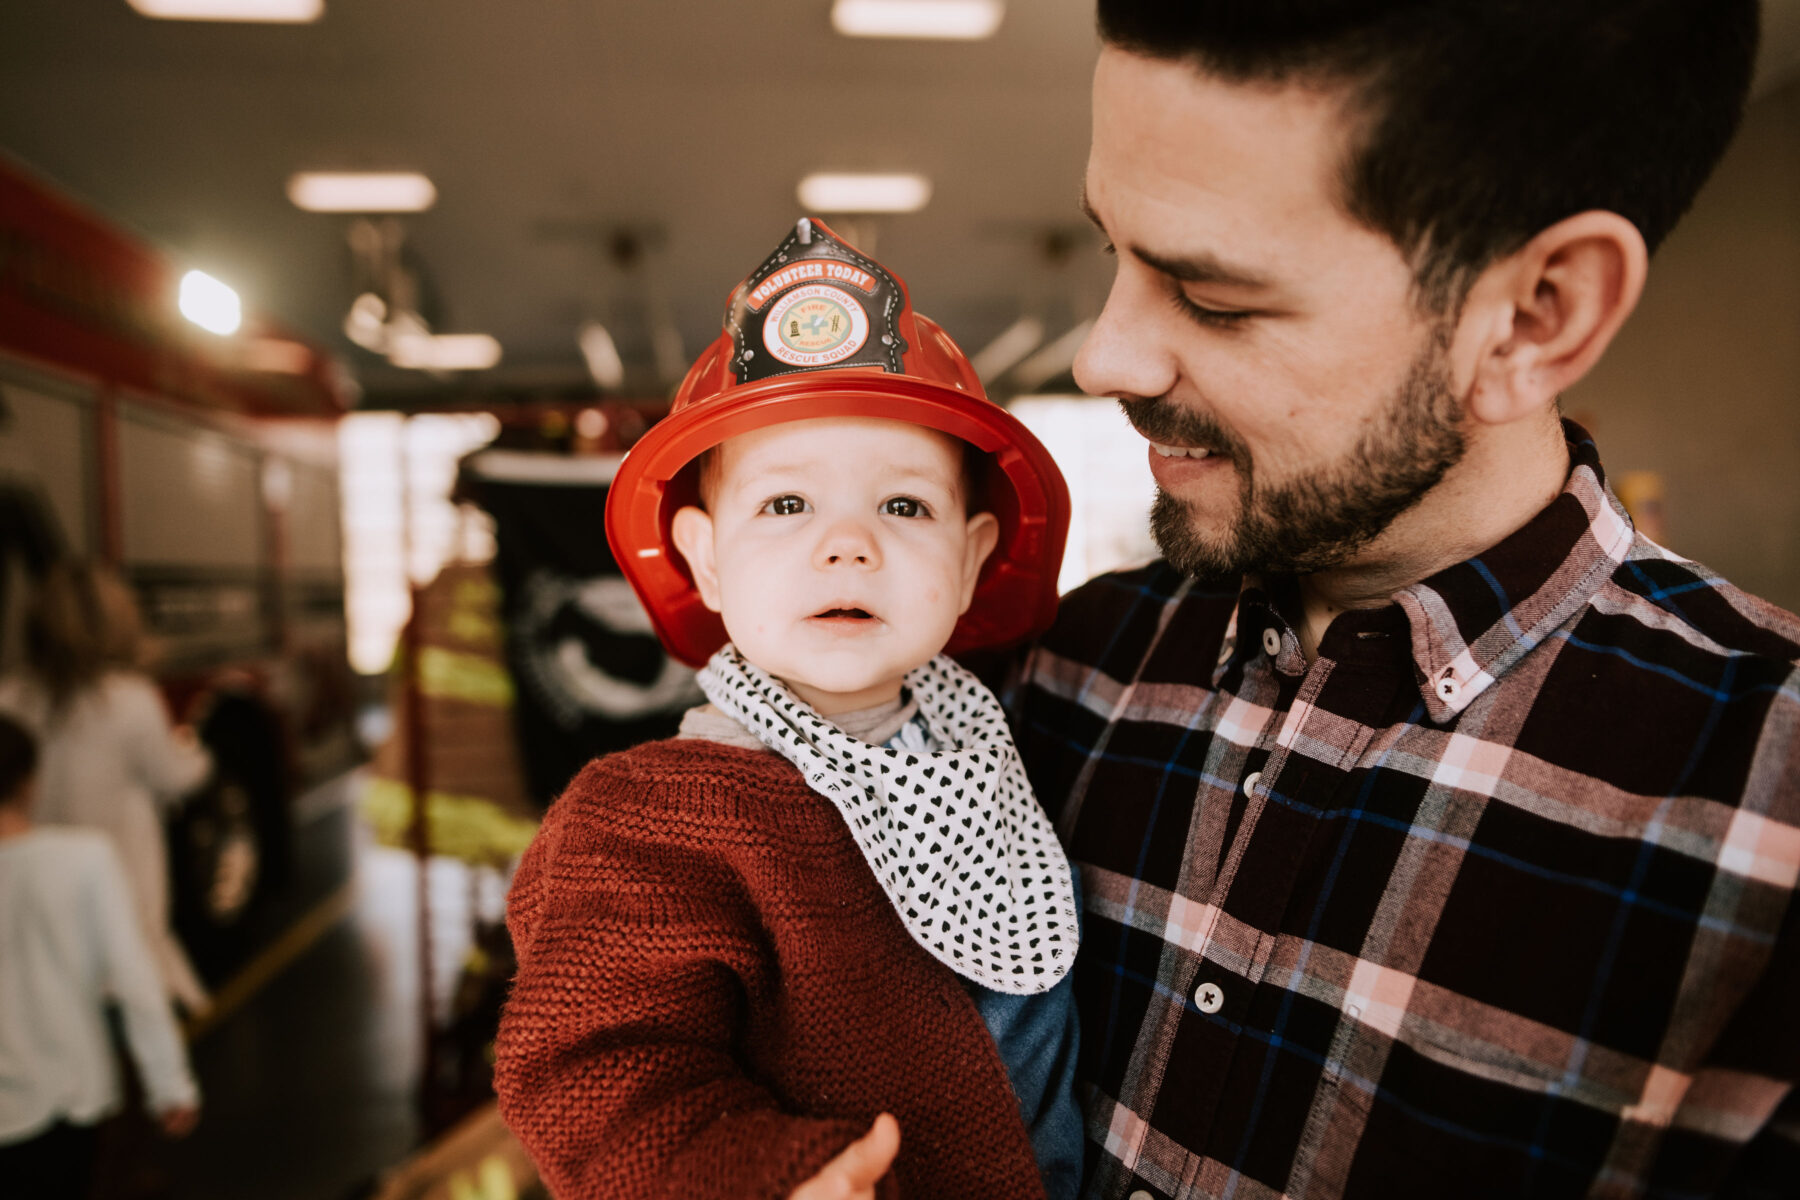 Firehouse Birthday Party featured on Nashville Baby Guide